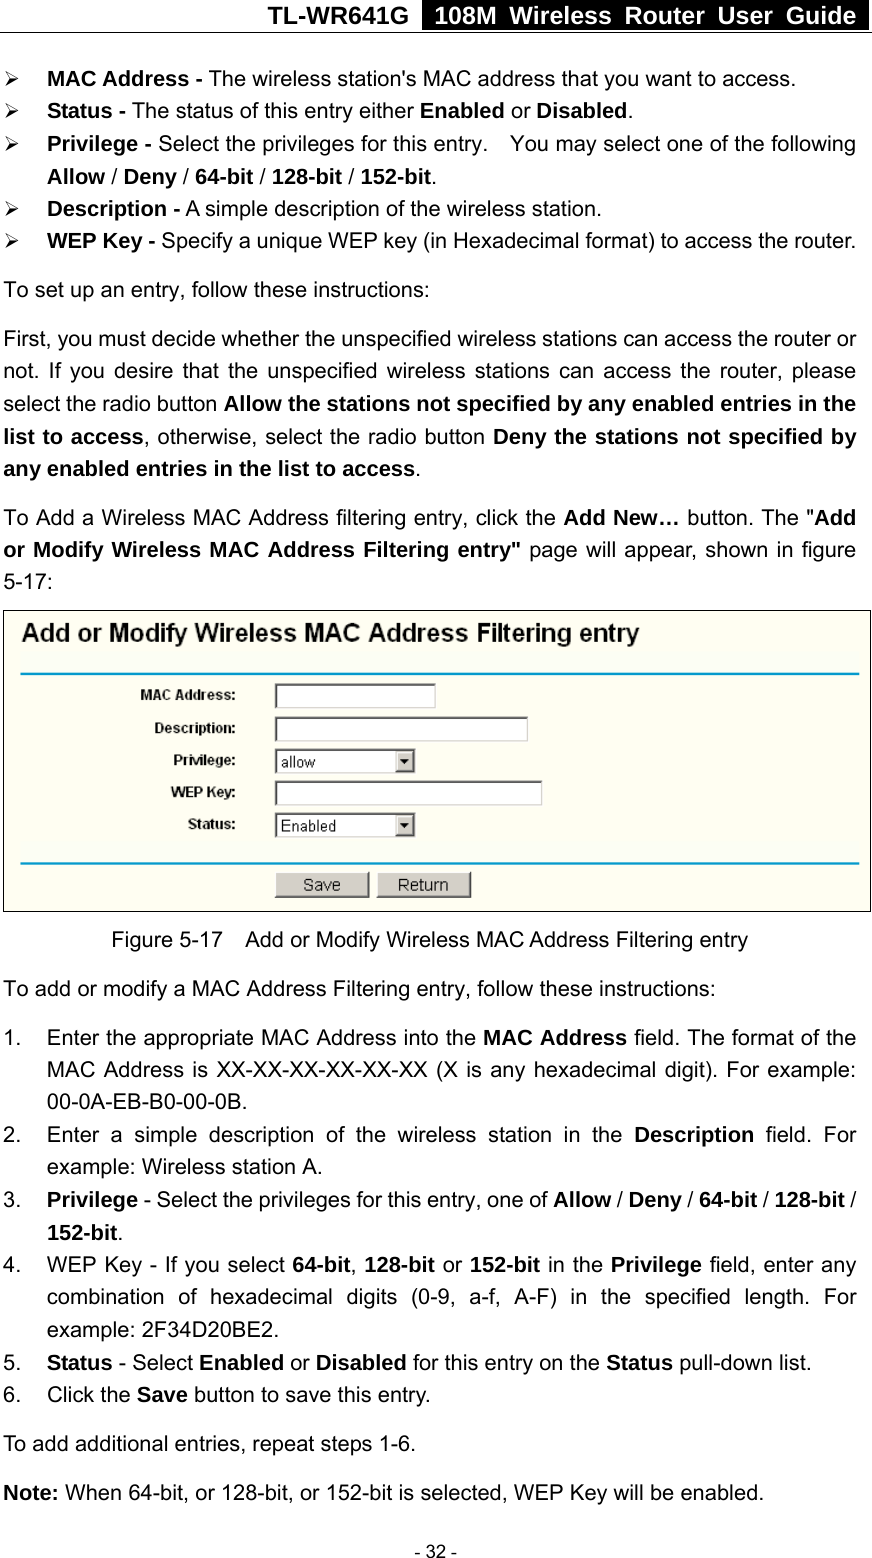 TL-WR641G   108M Wireless Router User Guide  ¾ MAC Address - The wireless station&apos;s MAC address that you want to access.   ¾ Status - The status of this entry either Enabled or Disabled. ¾ Privilege - Select the privileges for this entry.    You may select one of the following Allow / Deny / 64-bit / 128-bit / 152-bit.  ¾ Description - A simple description of the wireless station.   ¾ WEP Key - Specify a unique WEP key (in Hexadecimal format) to access the router.   To set up an entry, follow these instructions:   First, you must decide whether the unspecified wireless stations can access the router or not. If you desire that the unspecified wireless stations can access the router, please select the radio button Allow the stations not specified by any enabled entries in the list to access, otherwise, select the radio button Deny the stations not specified by any enabled entries in the list to access. To Add a Wireless MAC Address filtering entry, click the Add New… button. The &quot;Add or Modify Wireless MAC Address Filtering entry&quot; page will appear, shown in figure 5-17:  Figure 5-17    Add or Modify Wireless MAC Address Filtering entry To add or modify a MAC Address Filtering entry, follow these instructions: 1.  Enter the appropriate MAC Address into the MAC Address field. The format of the MAC Address is XX-XX-XX-XX-XX-XX (X is any hexadecimal digit). For example: 00-0A-EB-B0-00-0B.  2.  Enter a simple description of the wireless station in the Description field. For example: Wireless station A. 3.  Privilege - Select the privileges for this entry, one of Allow / Deny / 64-bit / 128-bit / 152-bit.  4.  WEP Key - If you select 64-bit, 128-bit or 152-bit in the Privilege field, enter any combination of hexadecimal digits (0-9, a-f, A-F) in the specified length. For example: 2F34D20BE2.   5.  Status - Select Enabled or Disabled for this entry on the Status pull-down list. 6. Click the Save button to save this entry. To add additional entries, repeat steps 1-6. Note: When 64-bit, or 128-bit, or 152-bit is selected, WEP Key will be enabled.    - 32 - 